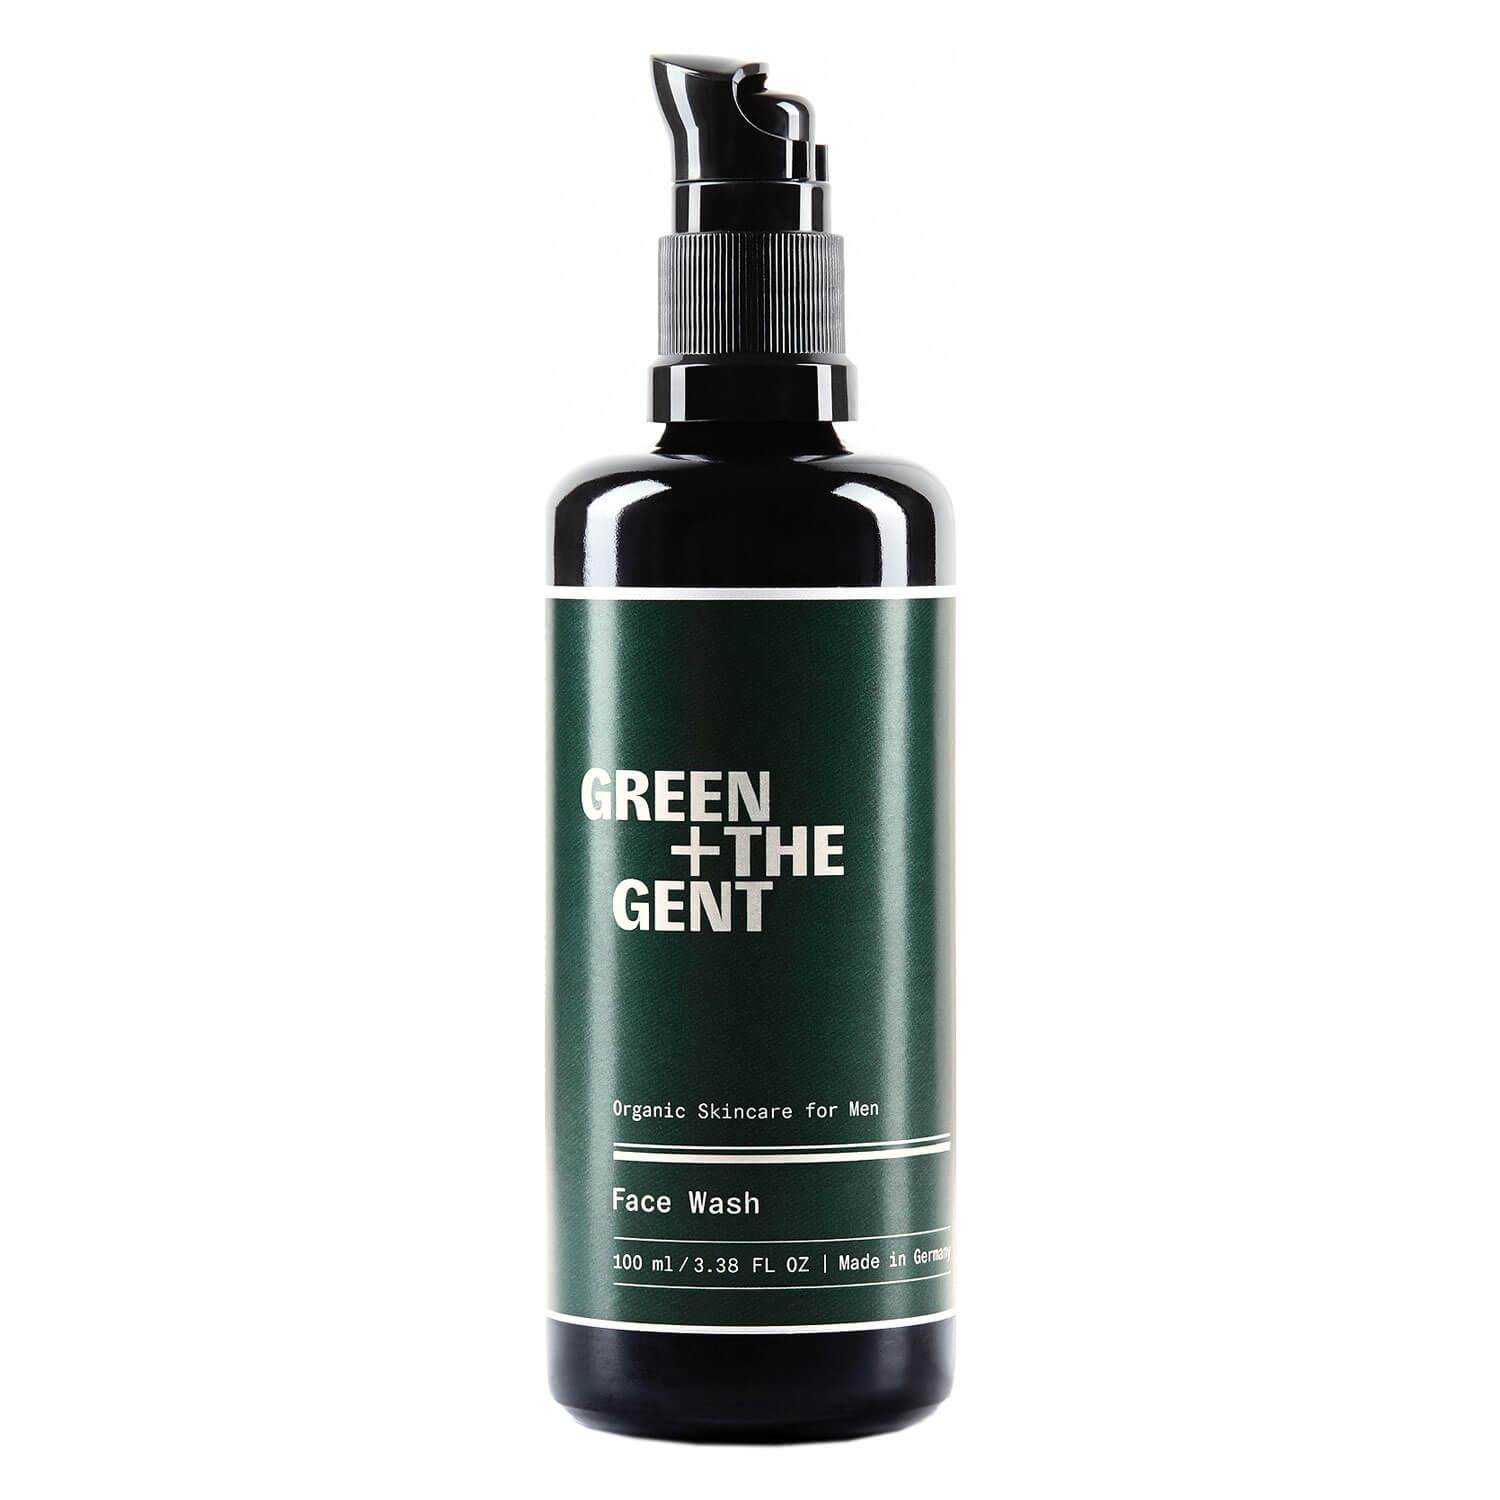 Green + The Gent - Face Wash